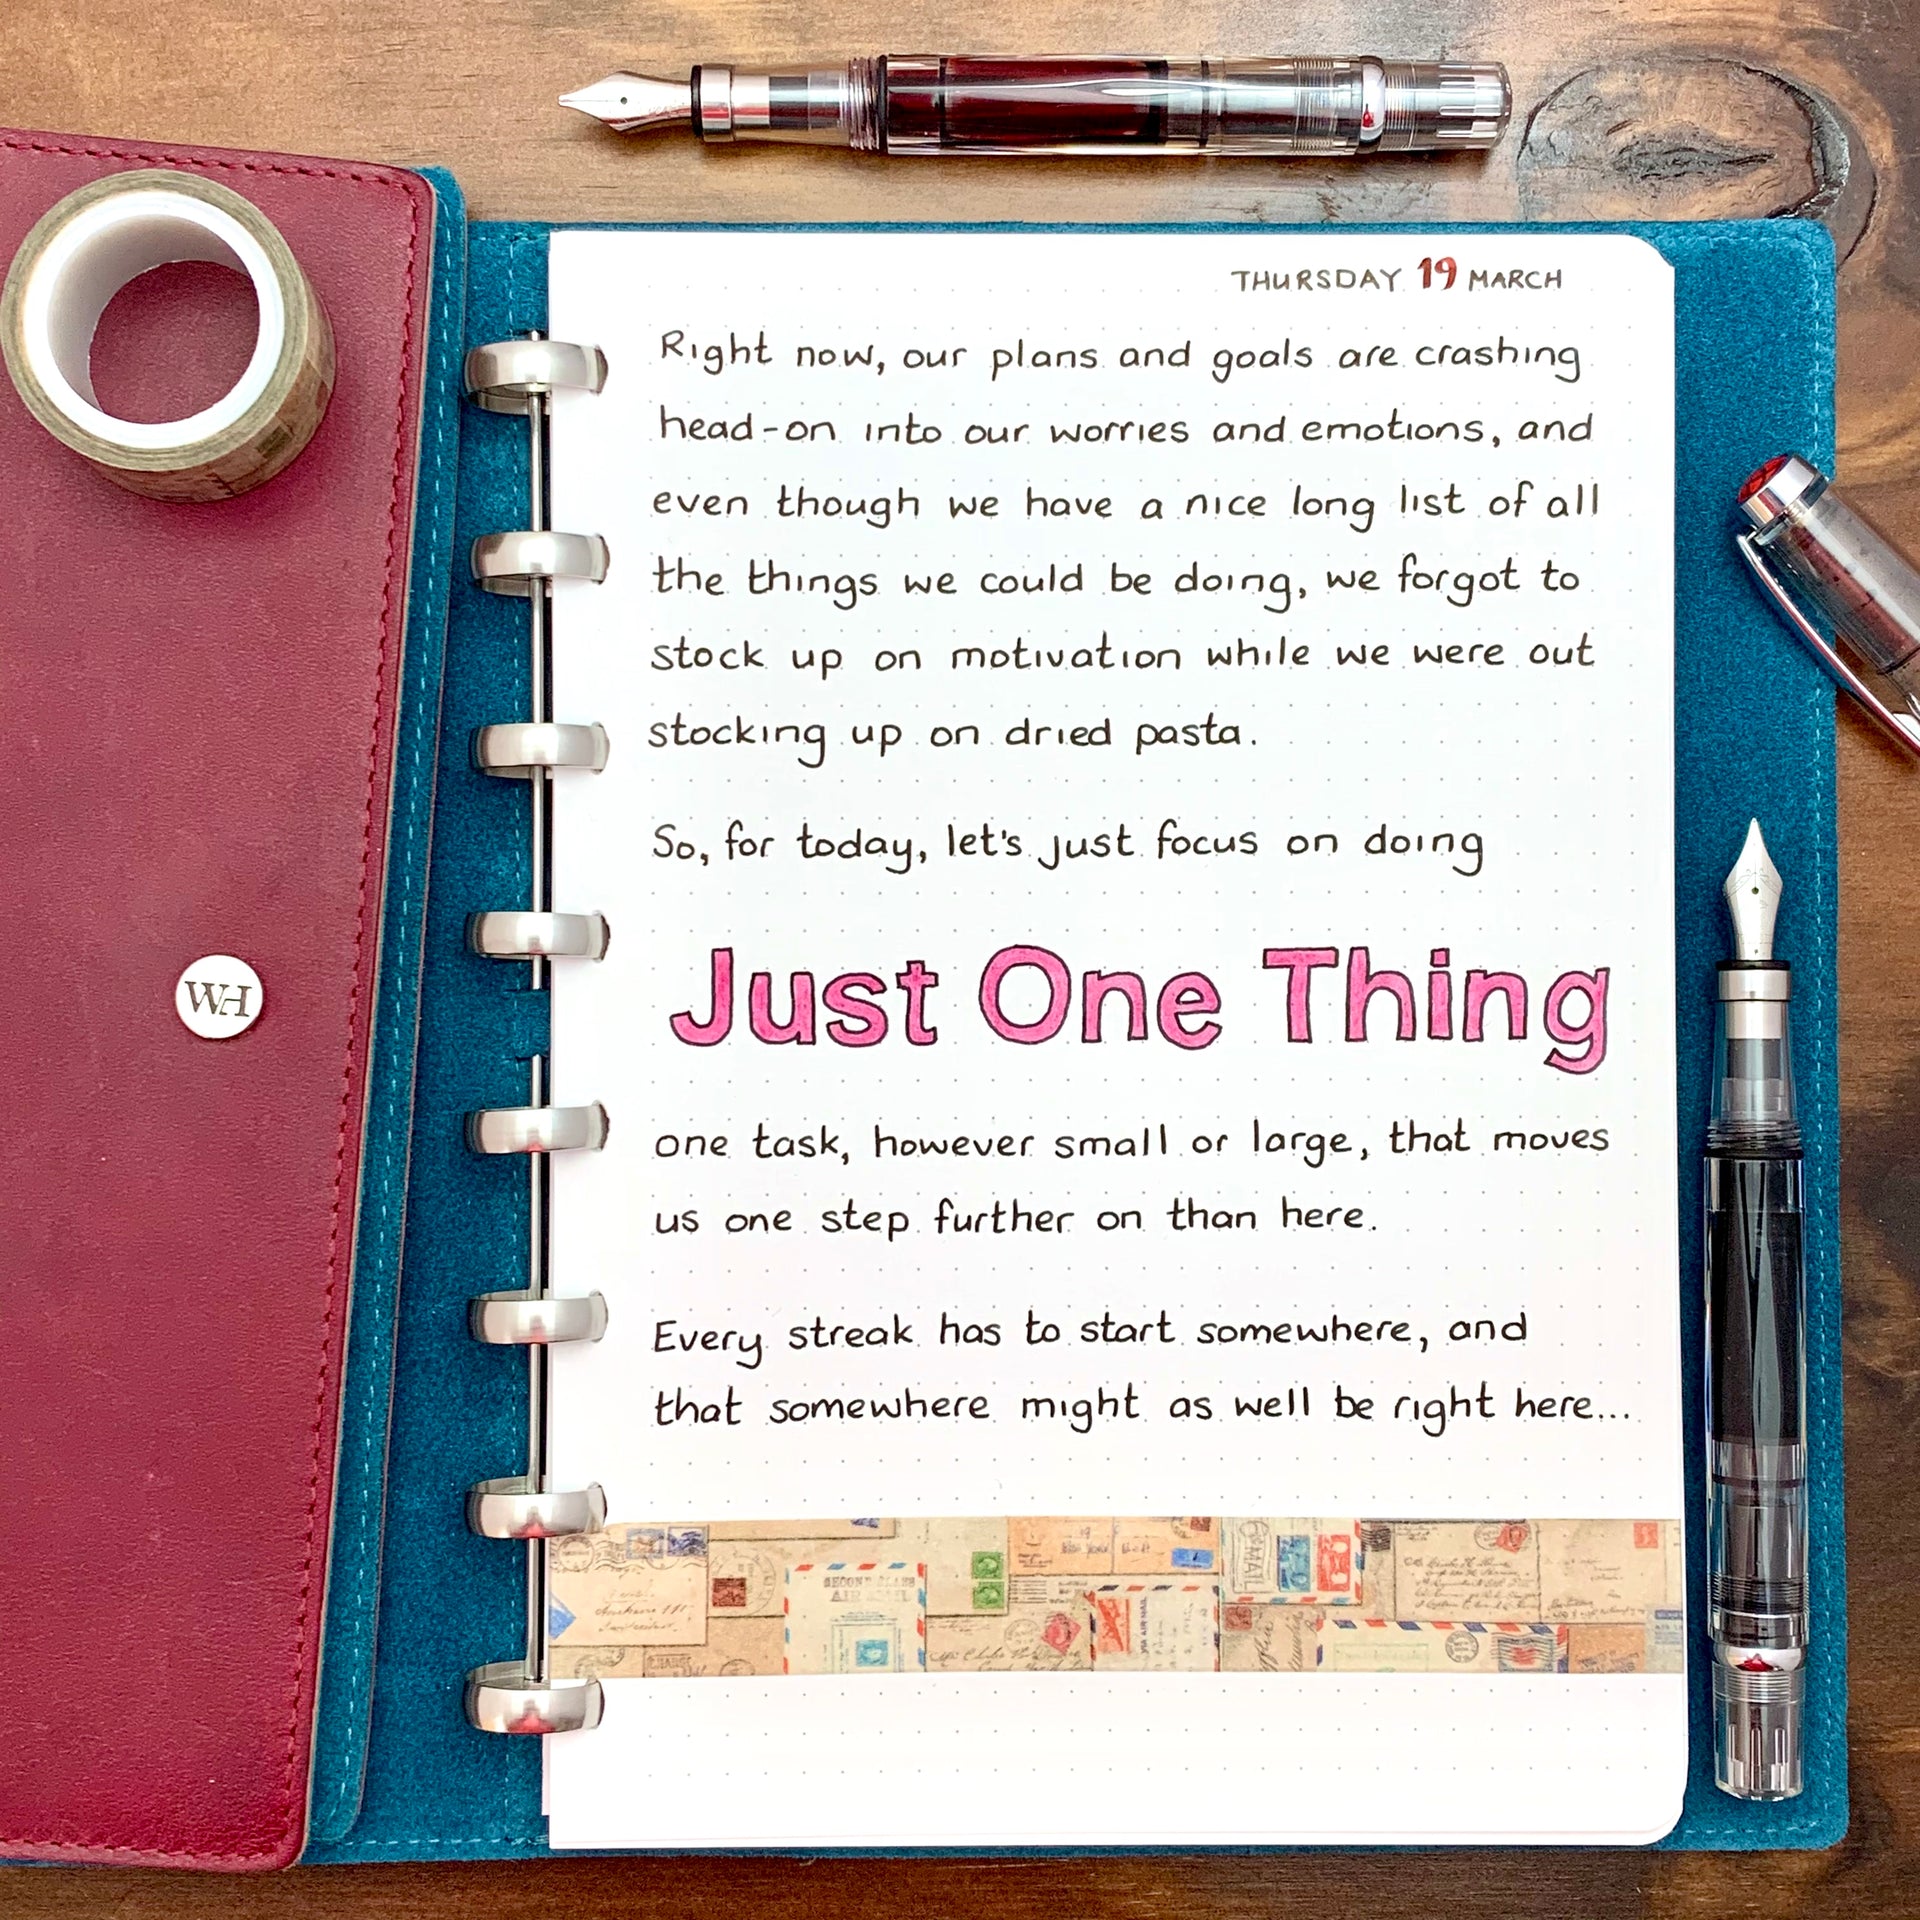 Just One Thing...